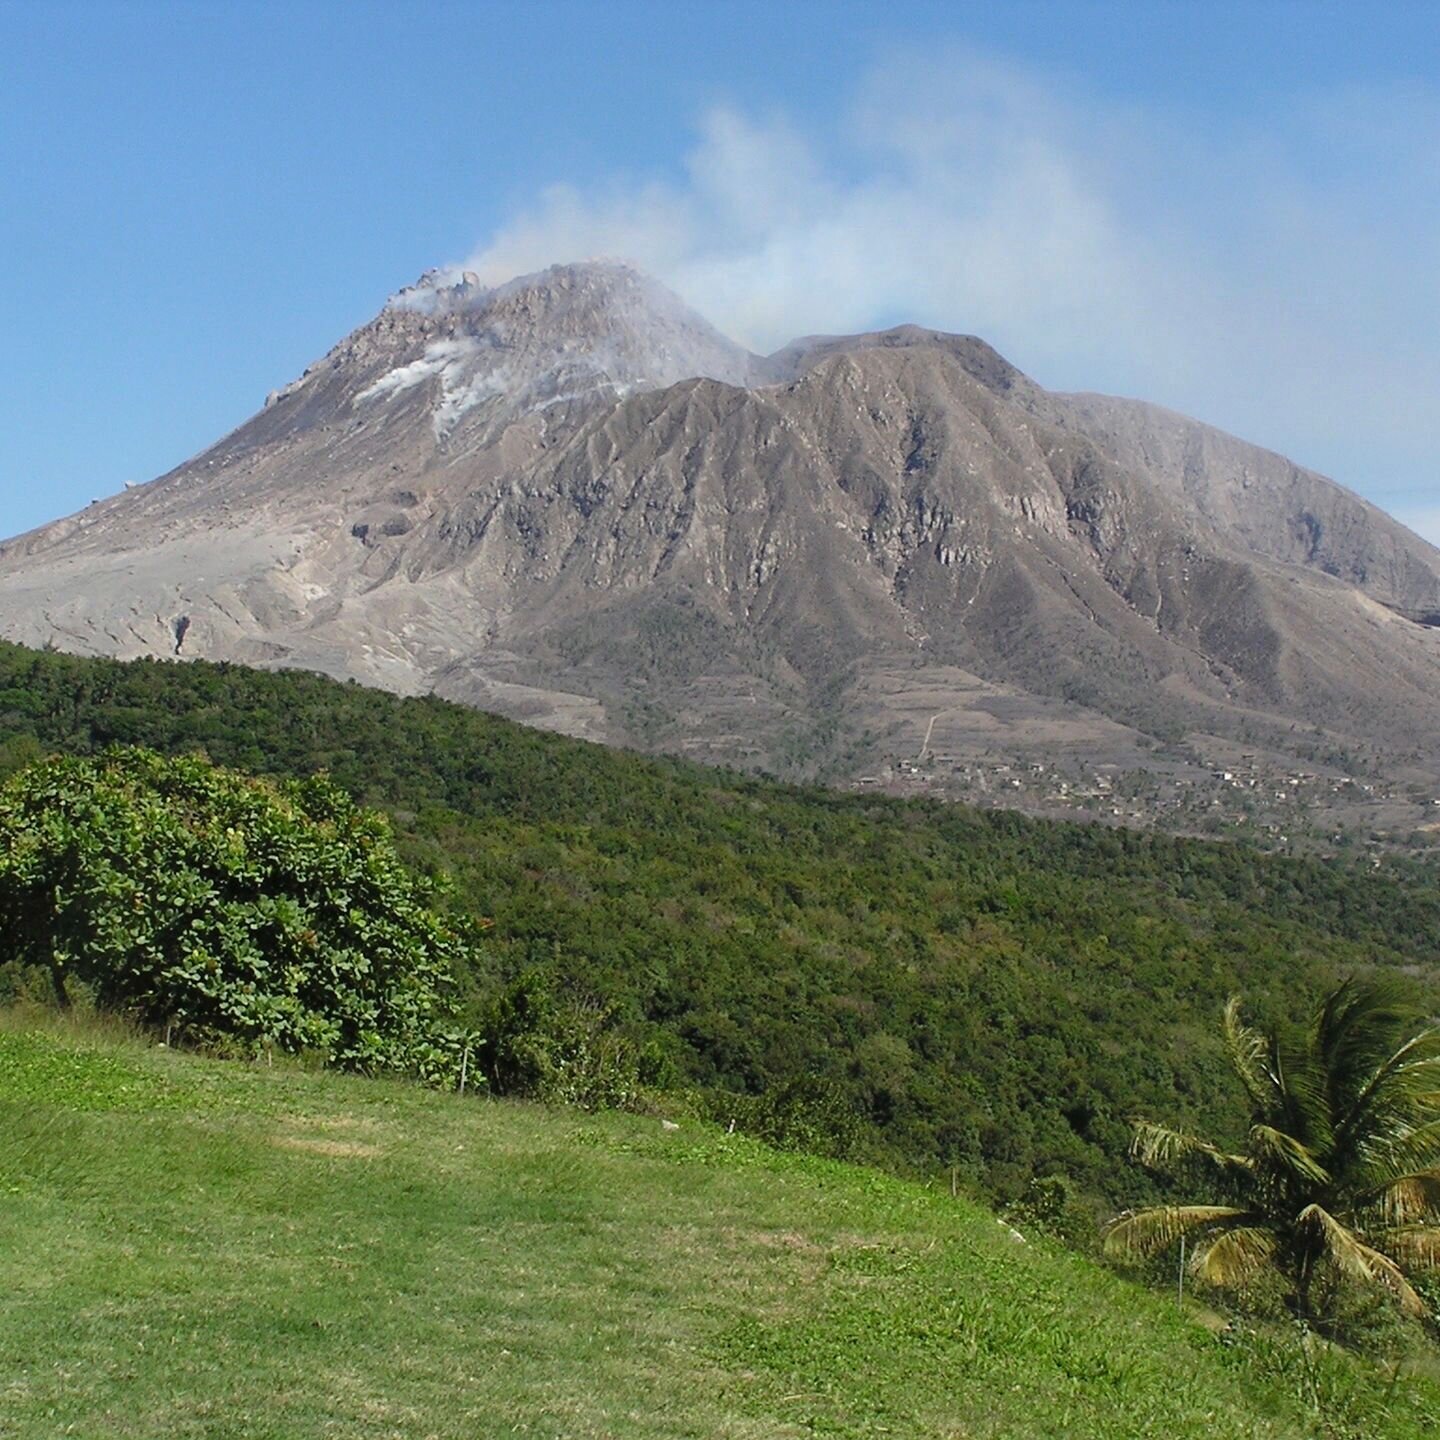 ON THIS DAY
On July 18, 1995, the Soufri&egrave;re Hills volcano erupted on Montserrat. The eruption destroyed the capital of the island and even though the town is now abandoned, it is still the legal capital. #OTD